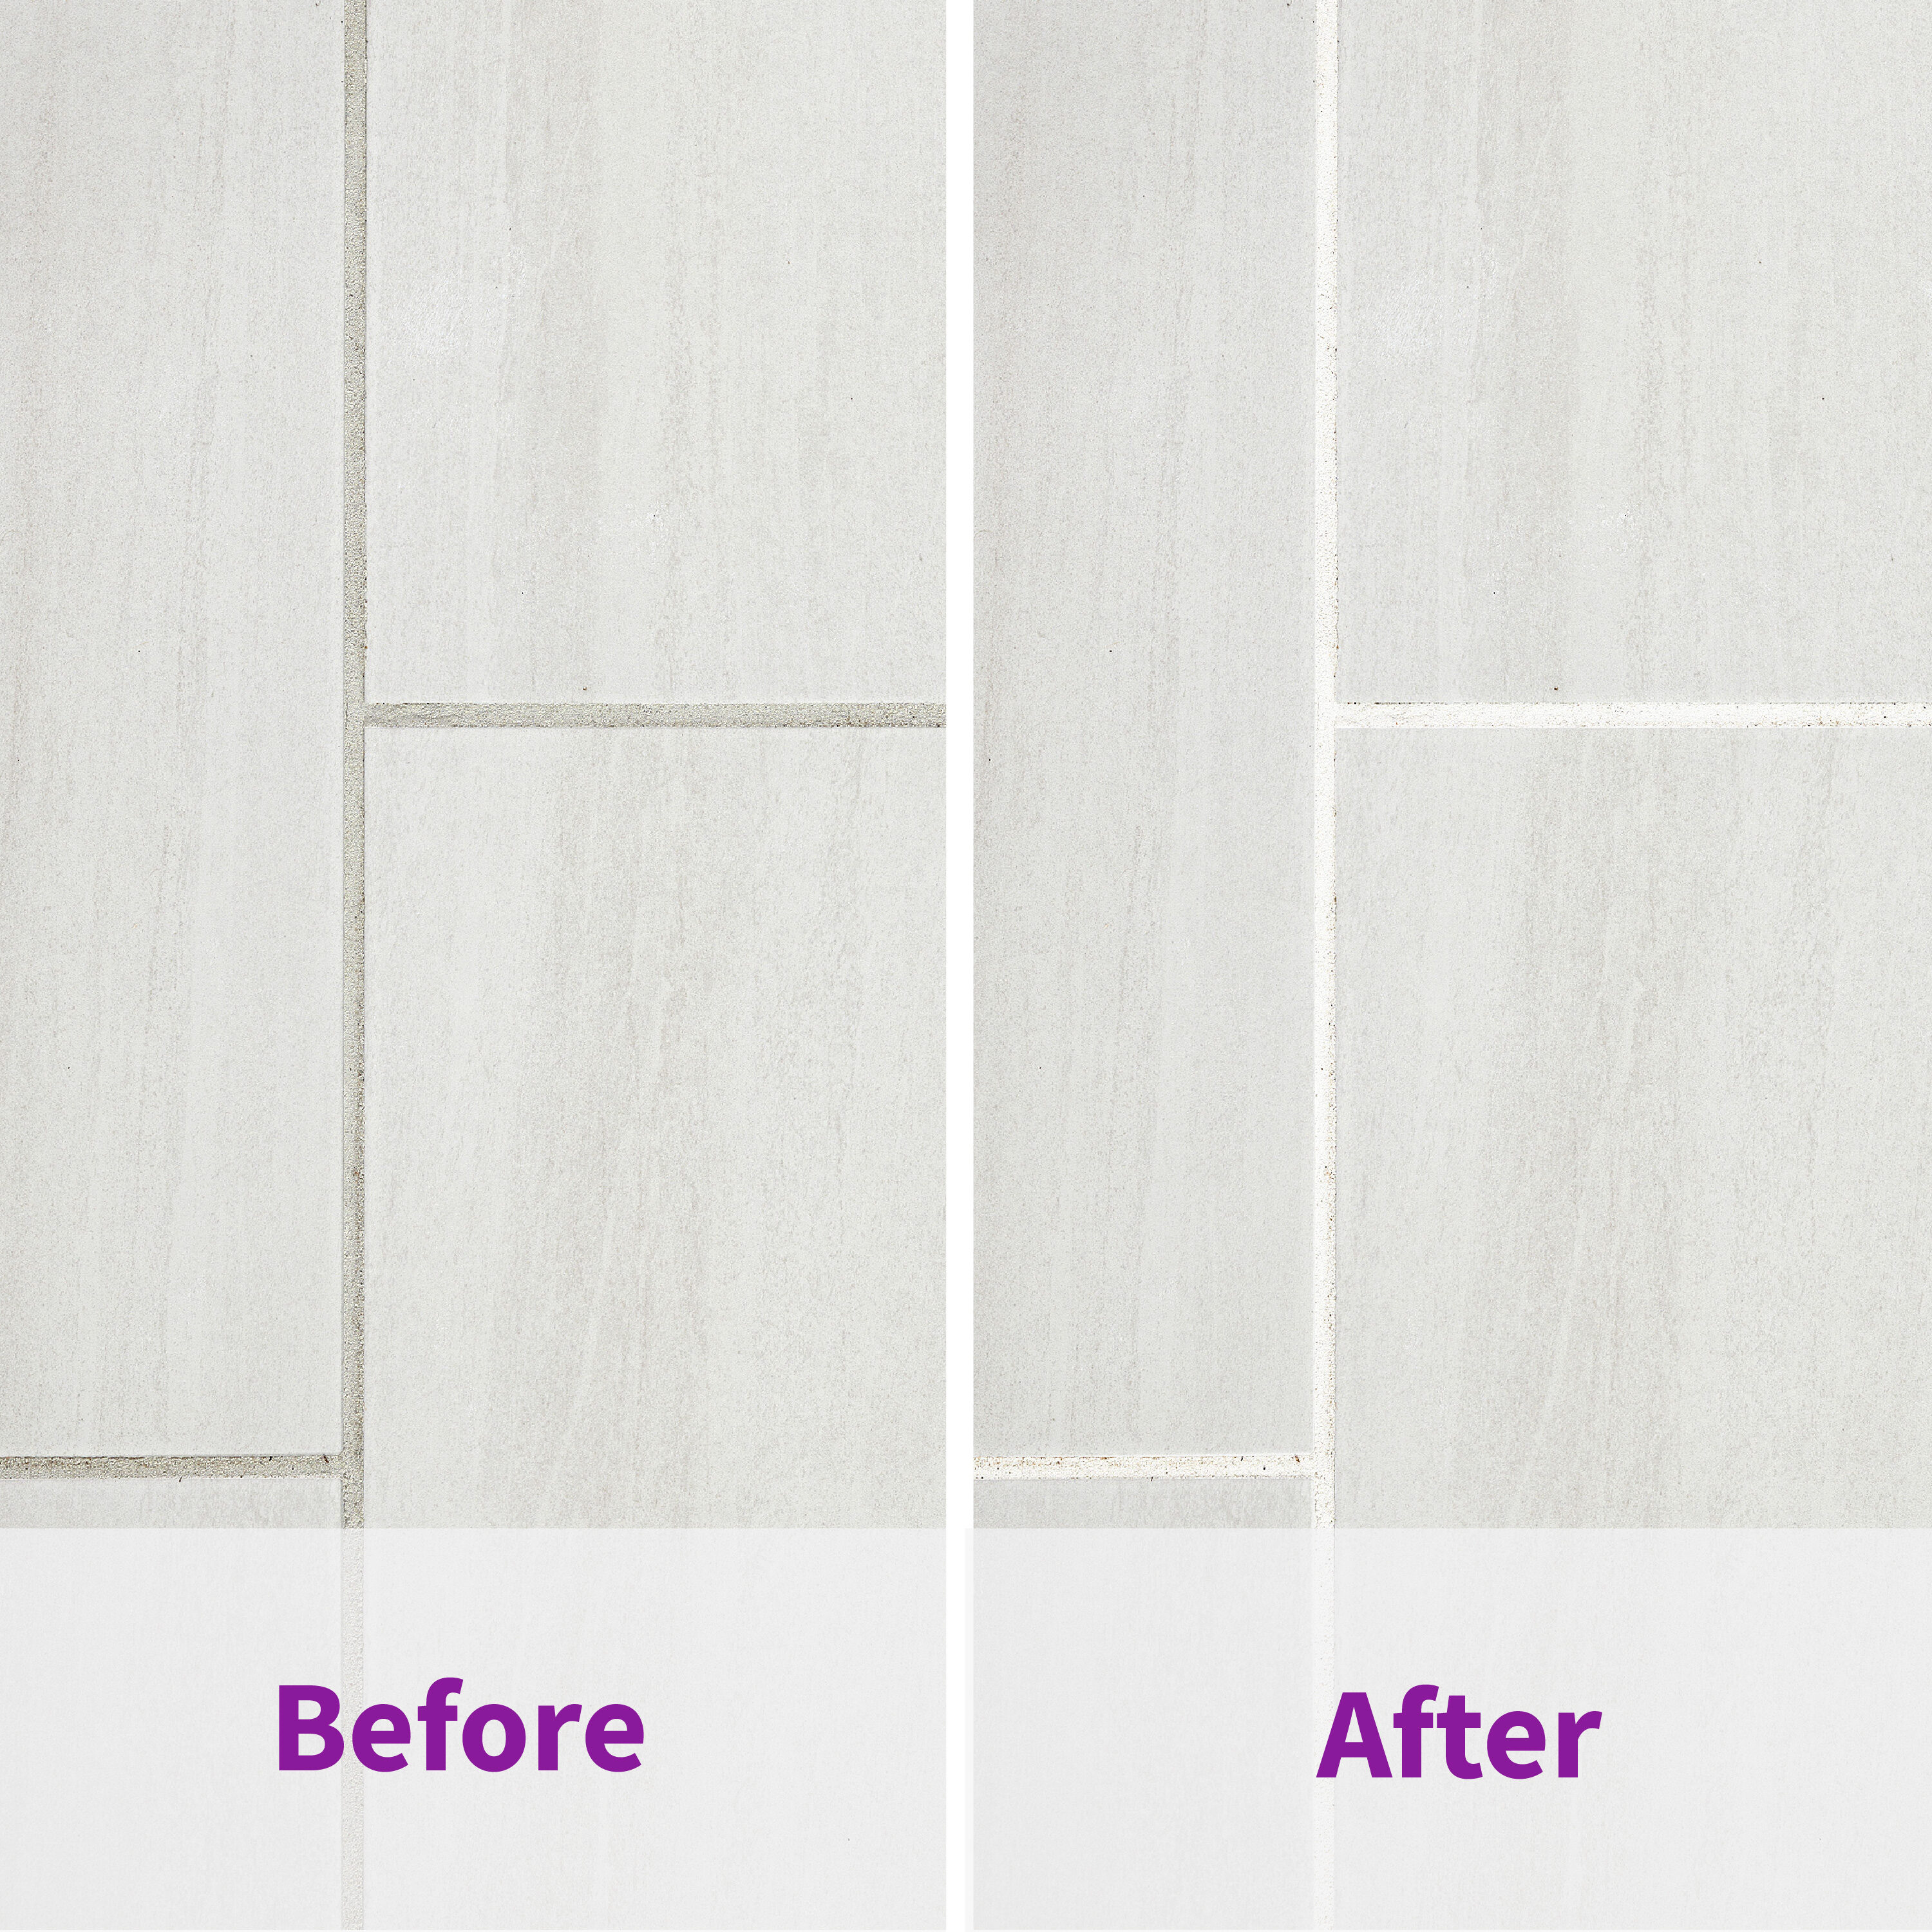 GROUT GURU Grout Cleaner for Tile Floors Works In Minutes - Powerful Tile  Cleaner for Bathroom, Shower, Kitchen, Porcelain, Ceramic and Stone Tiles 